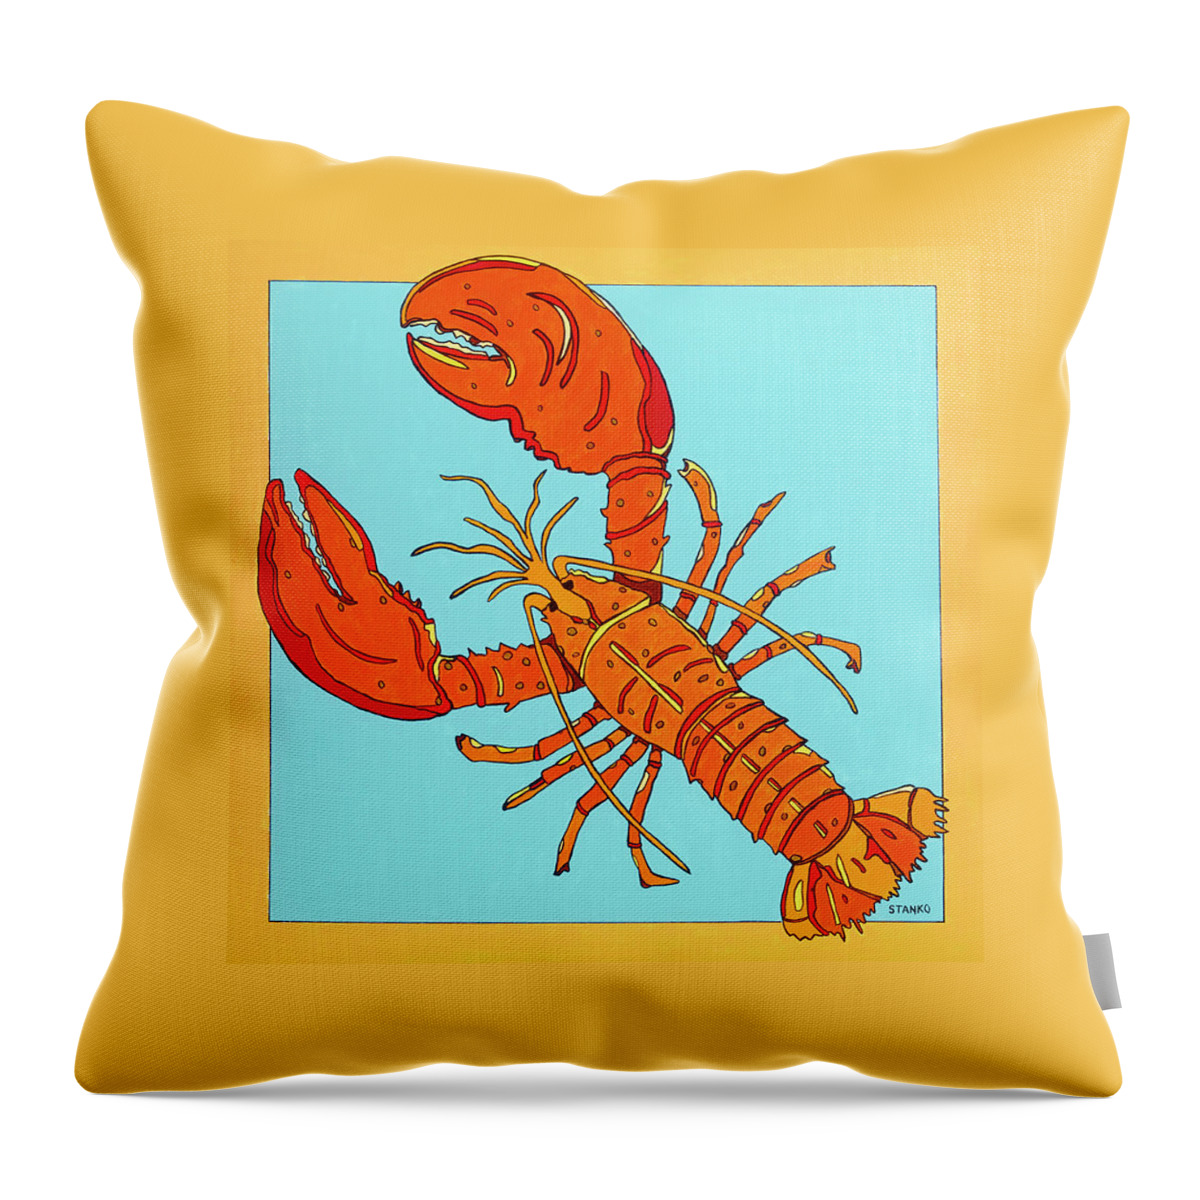 Lobster Seafood Throw Pillow featuring the painting Lobster by Mike Stanko